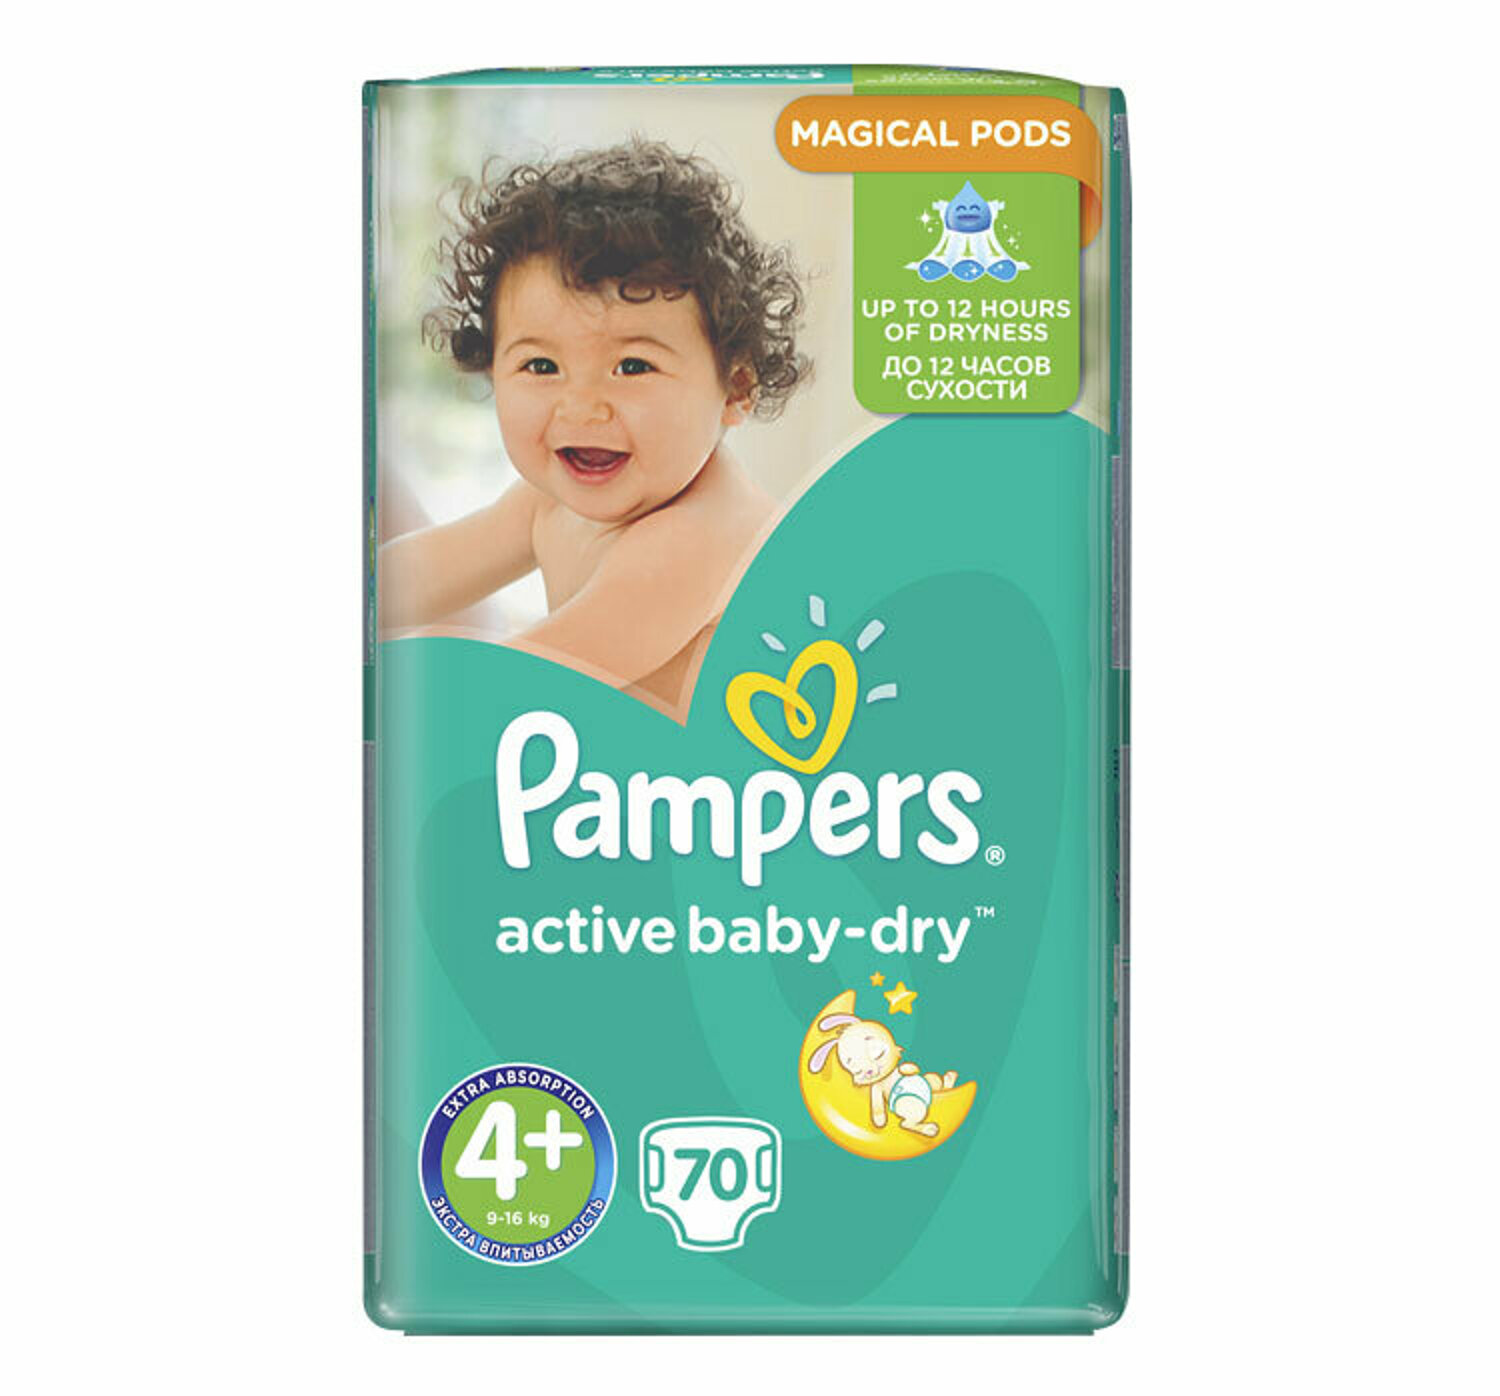 Scutece Pampers Active Baby Maxi Plus 4+ Giant Pack, 10-15 kg, 70 buc, reducere mare